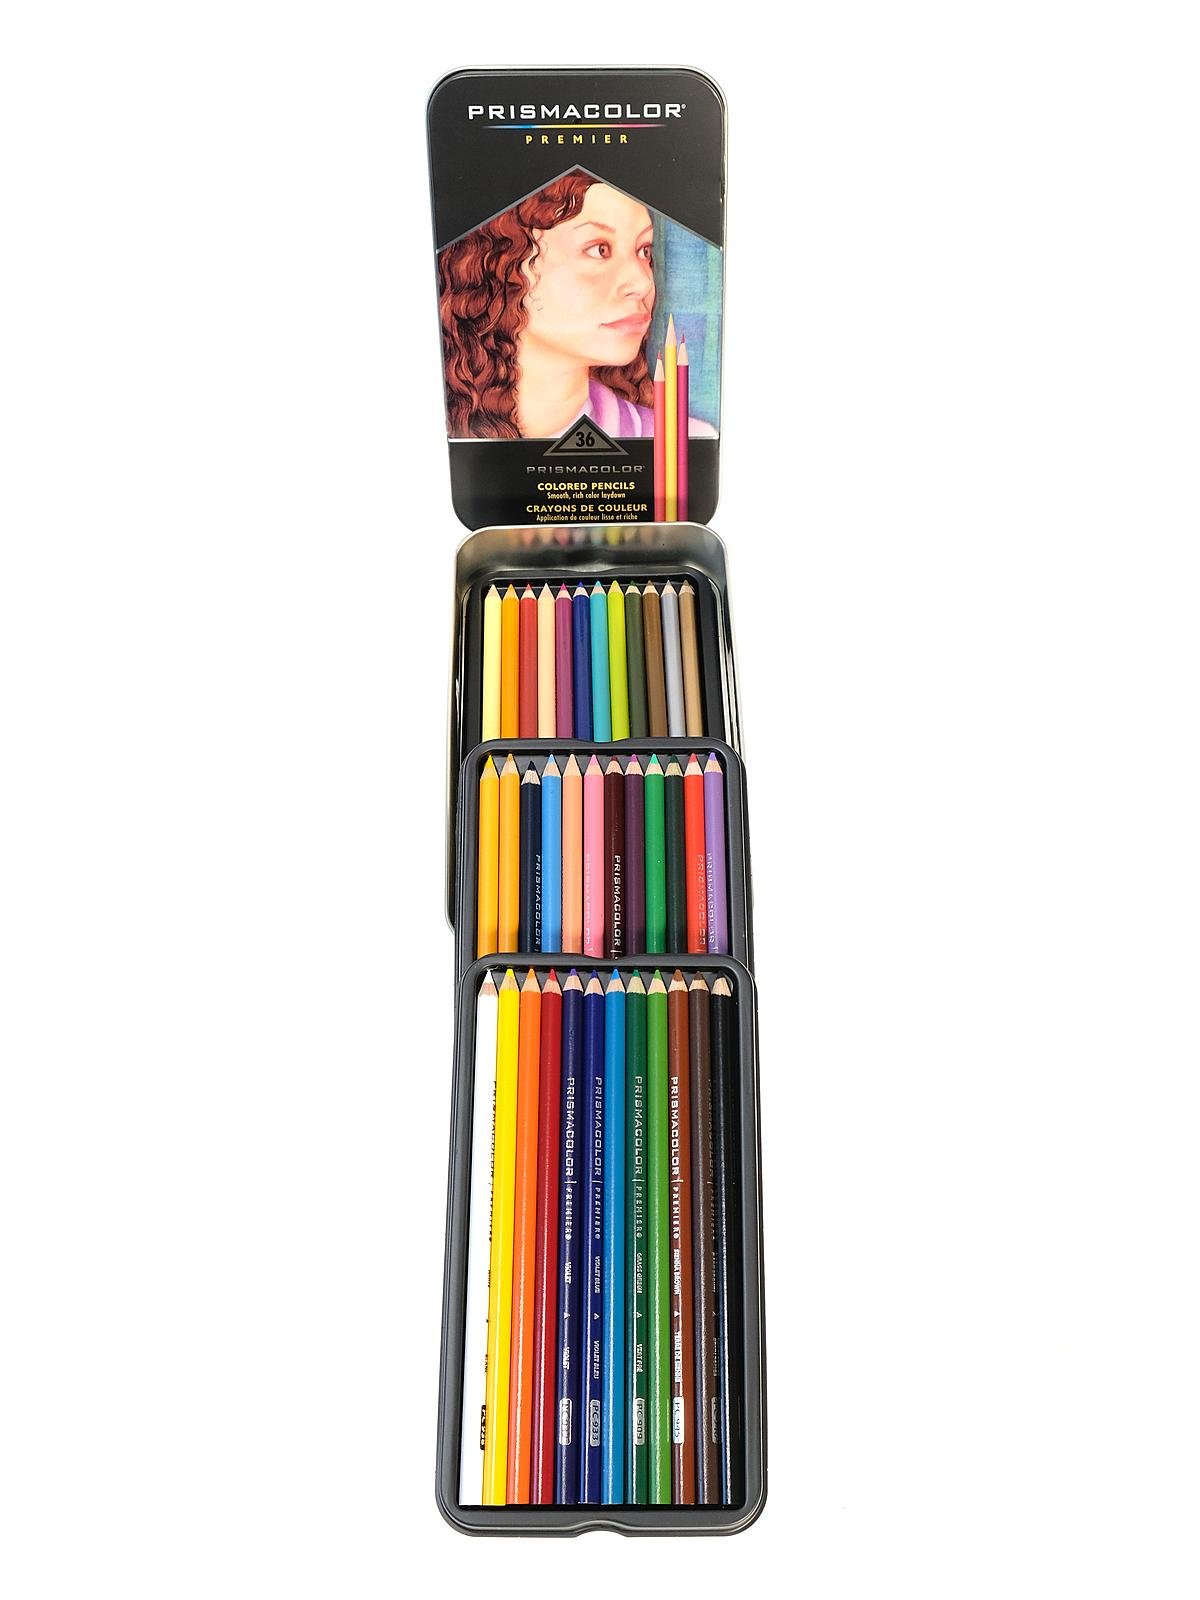 What's your go to Pencil Set? We all know I love my prismacolors